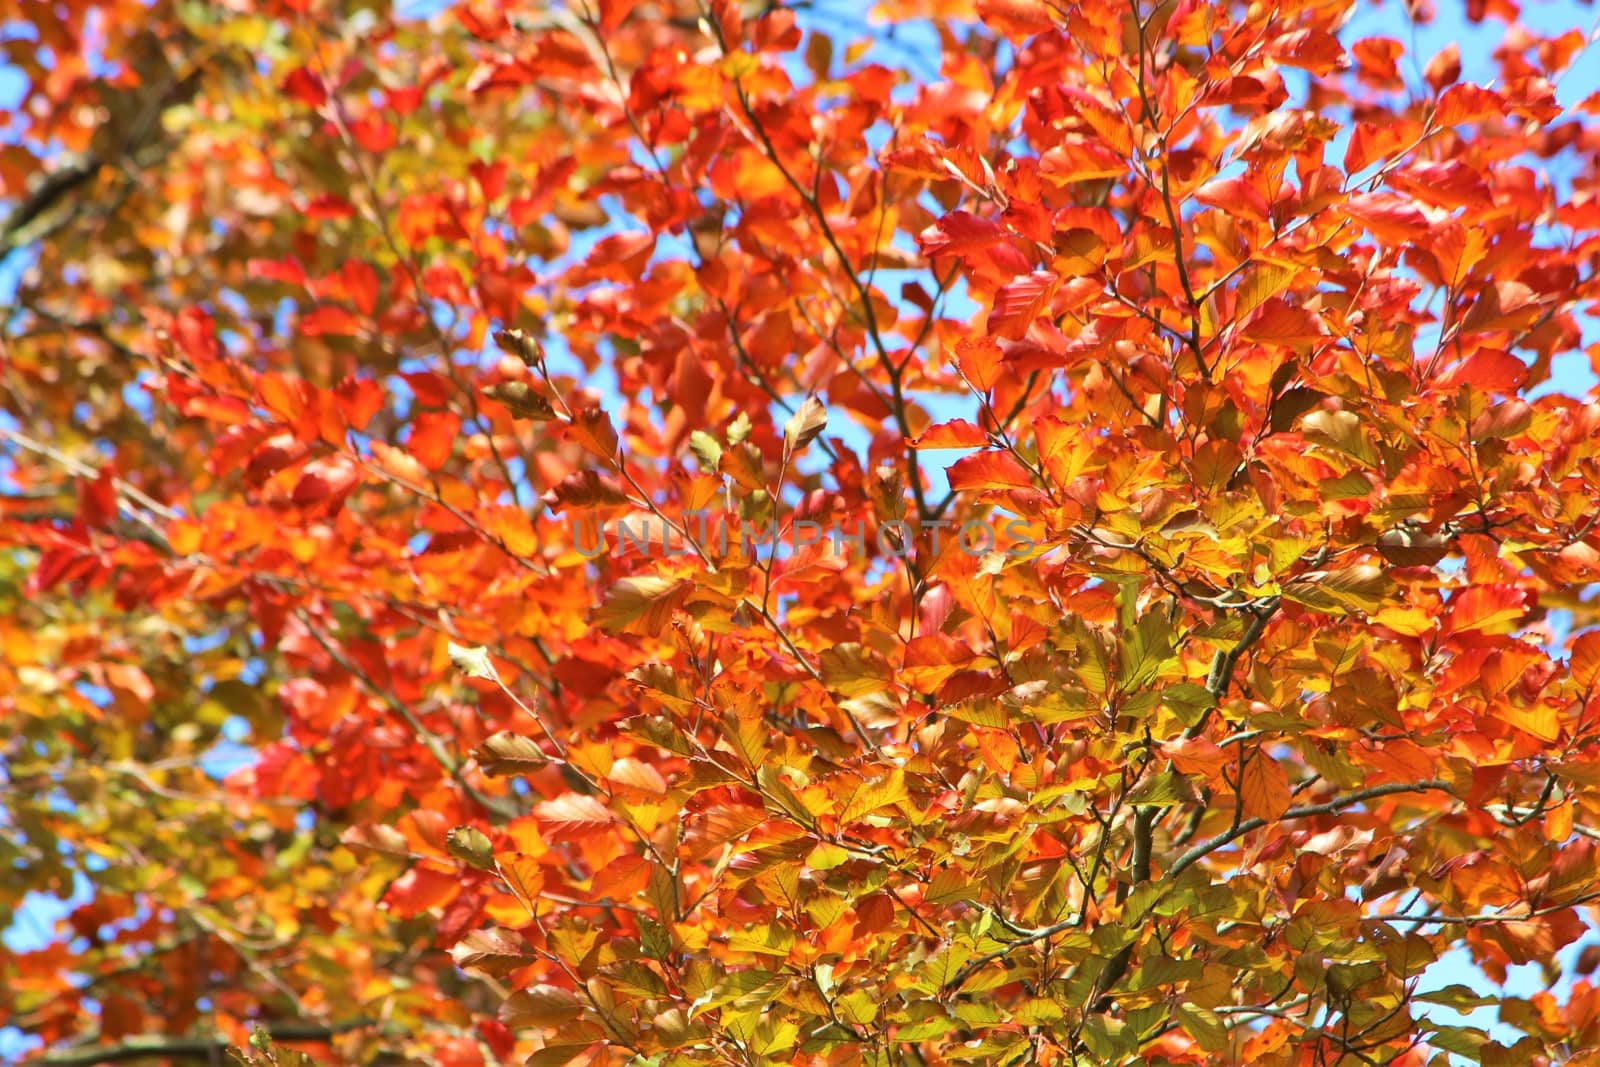 A close-up image of colourful Beech leaves in the Autumn.